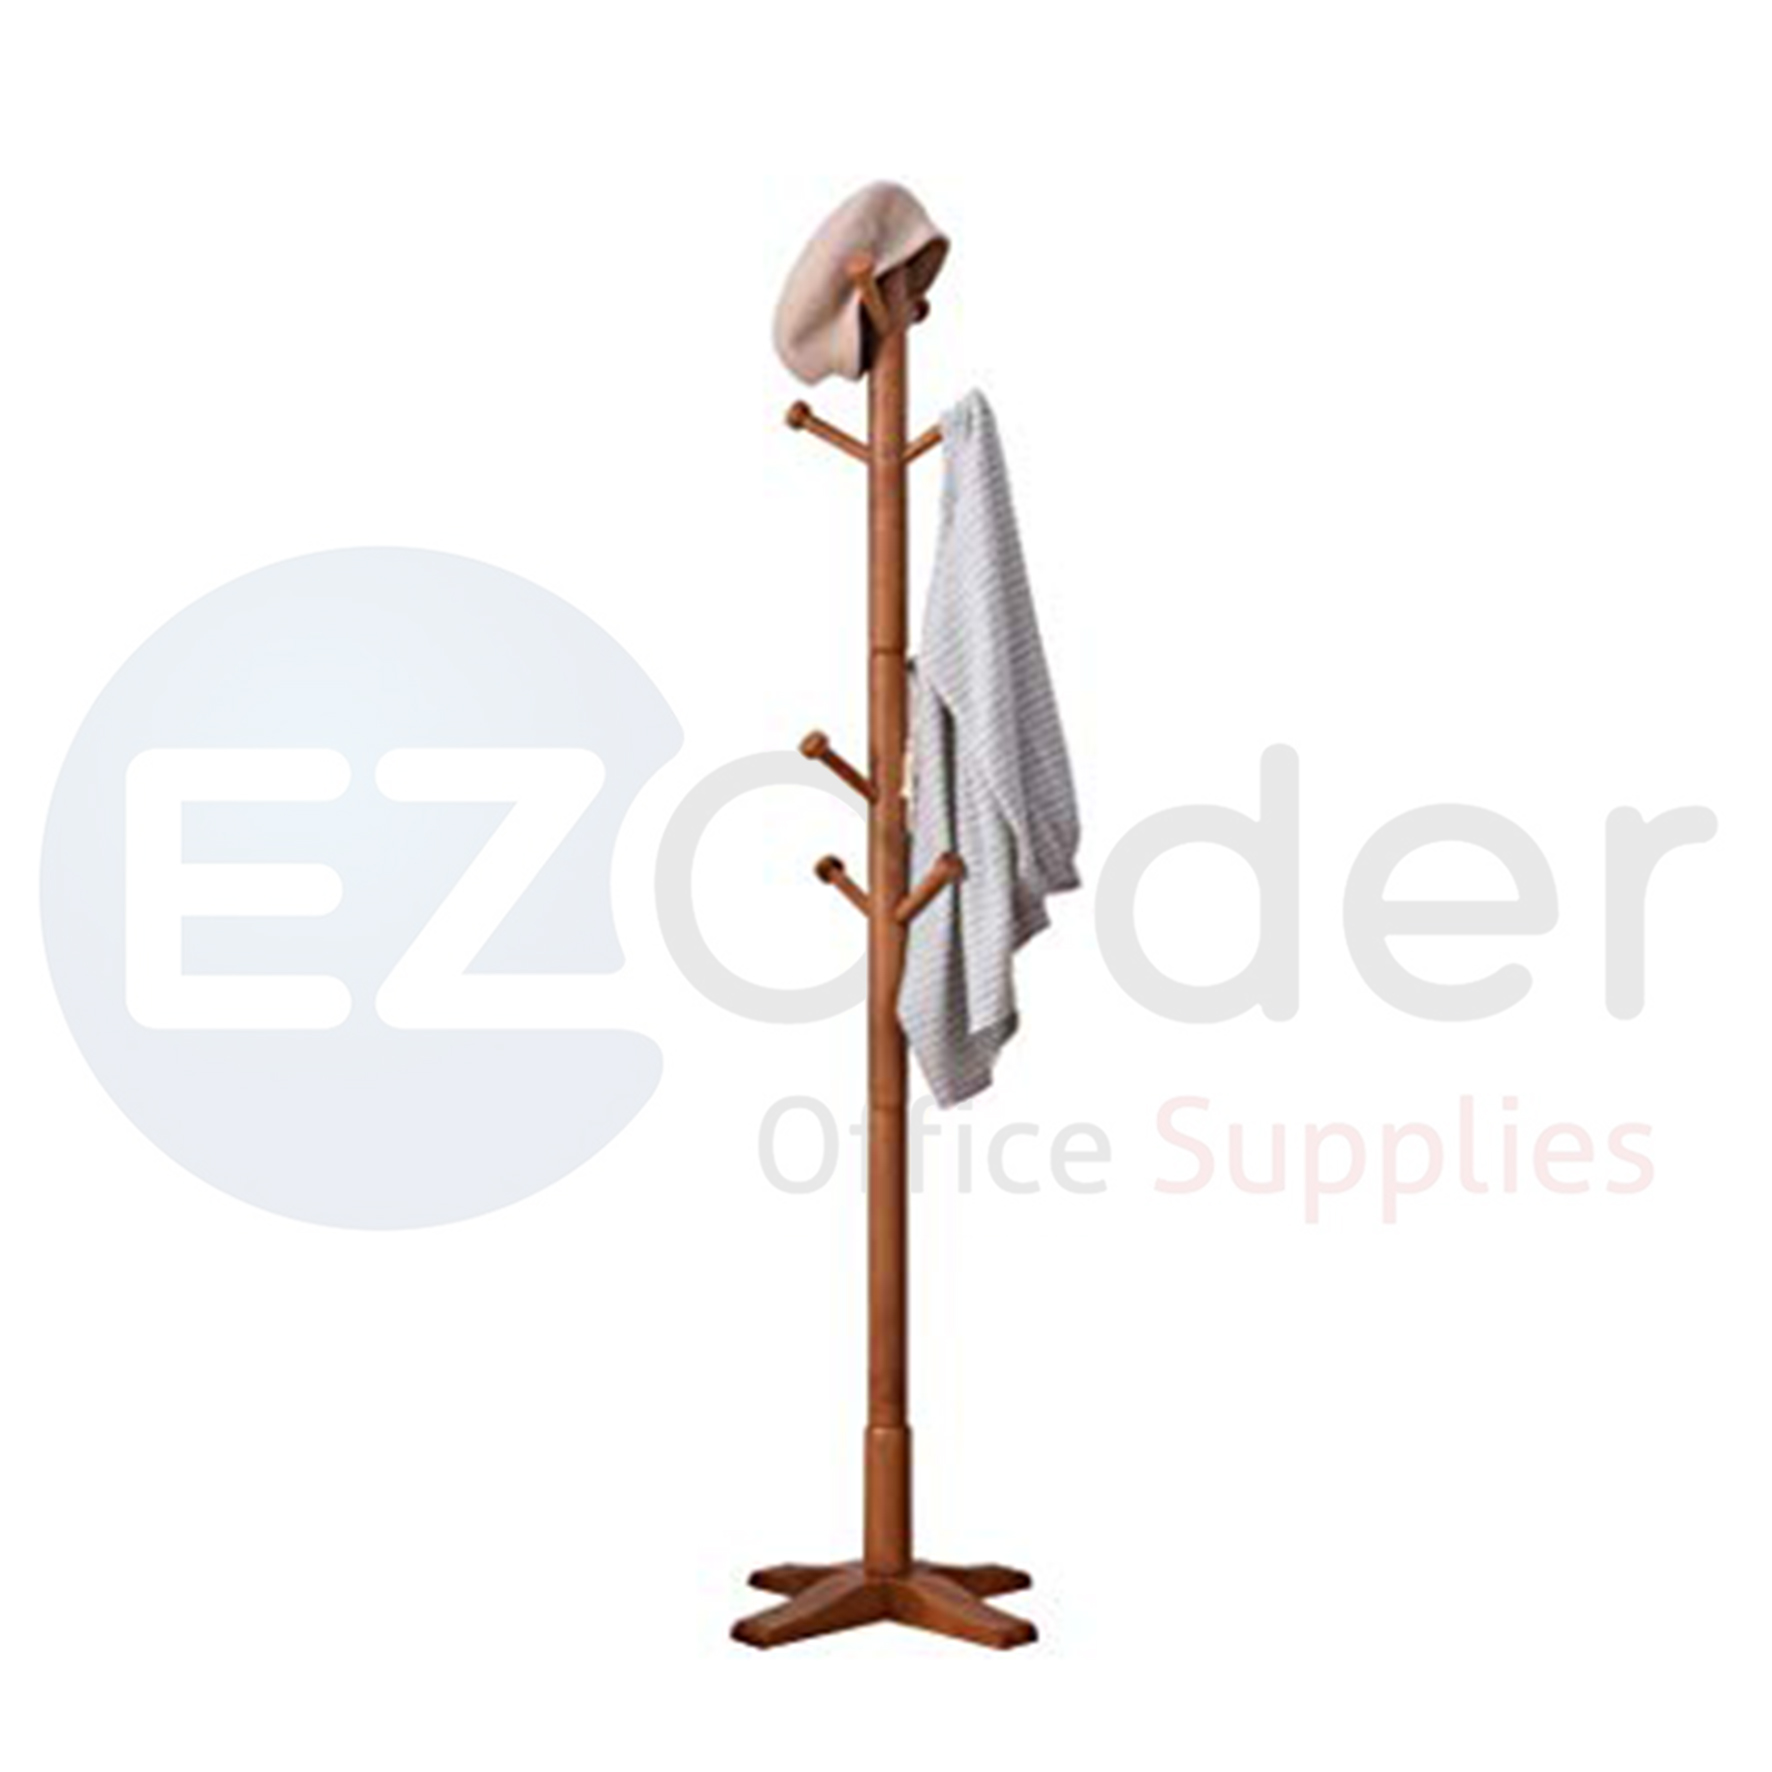 Coat hanger stand with wood